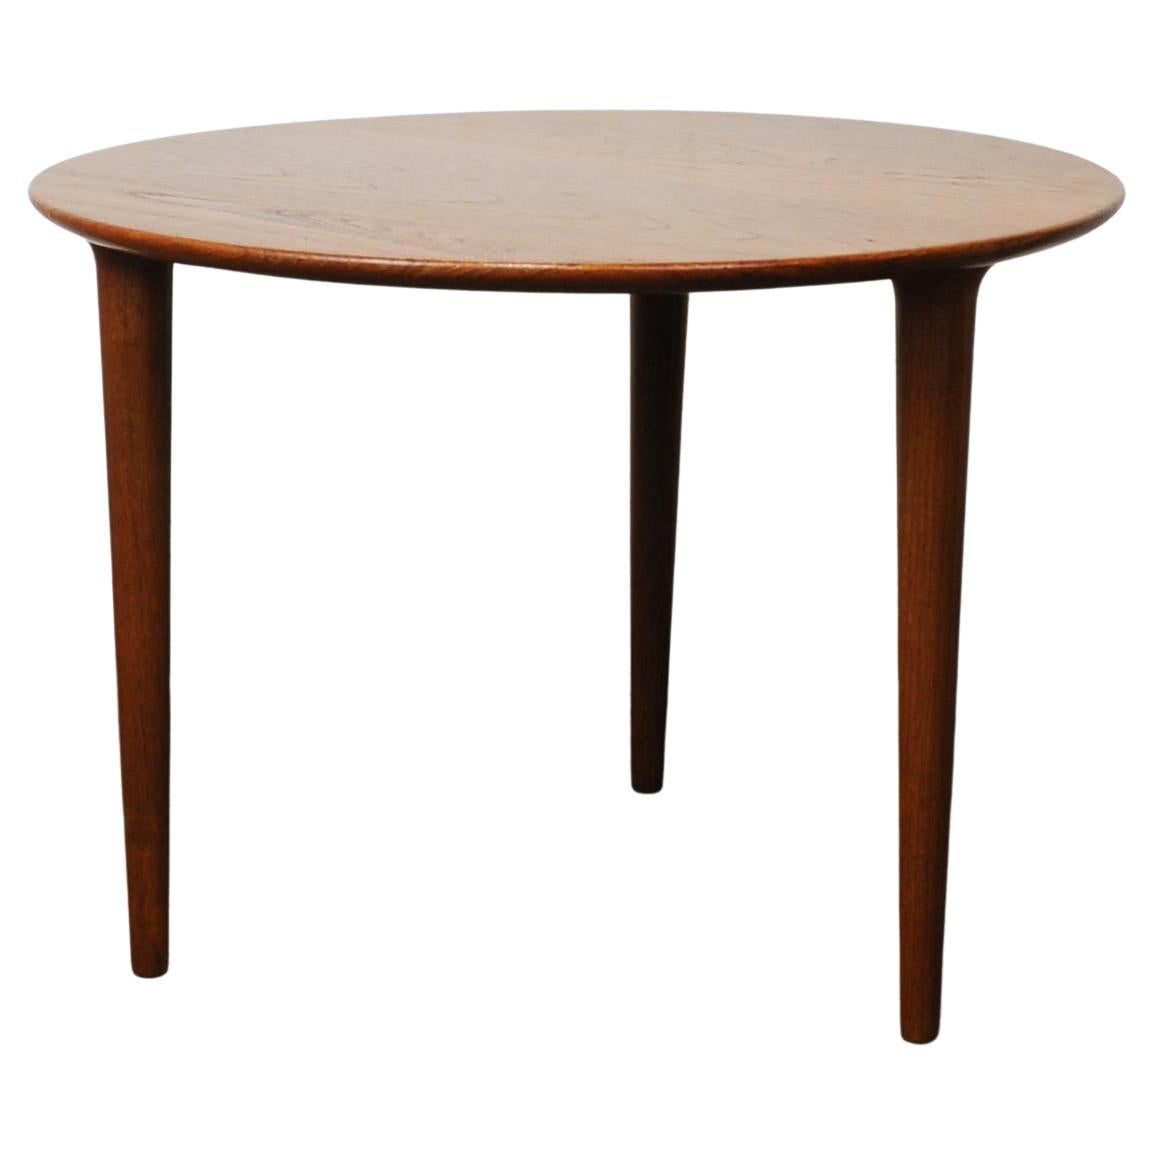 Round Teak Three Legged Coffee Table by Norsk Design Ltd, 1960s For Sale